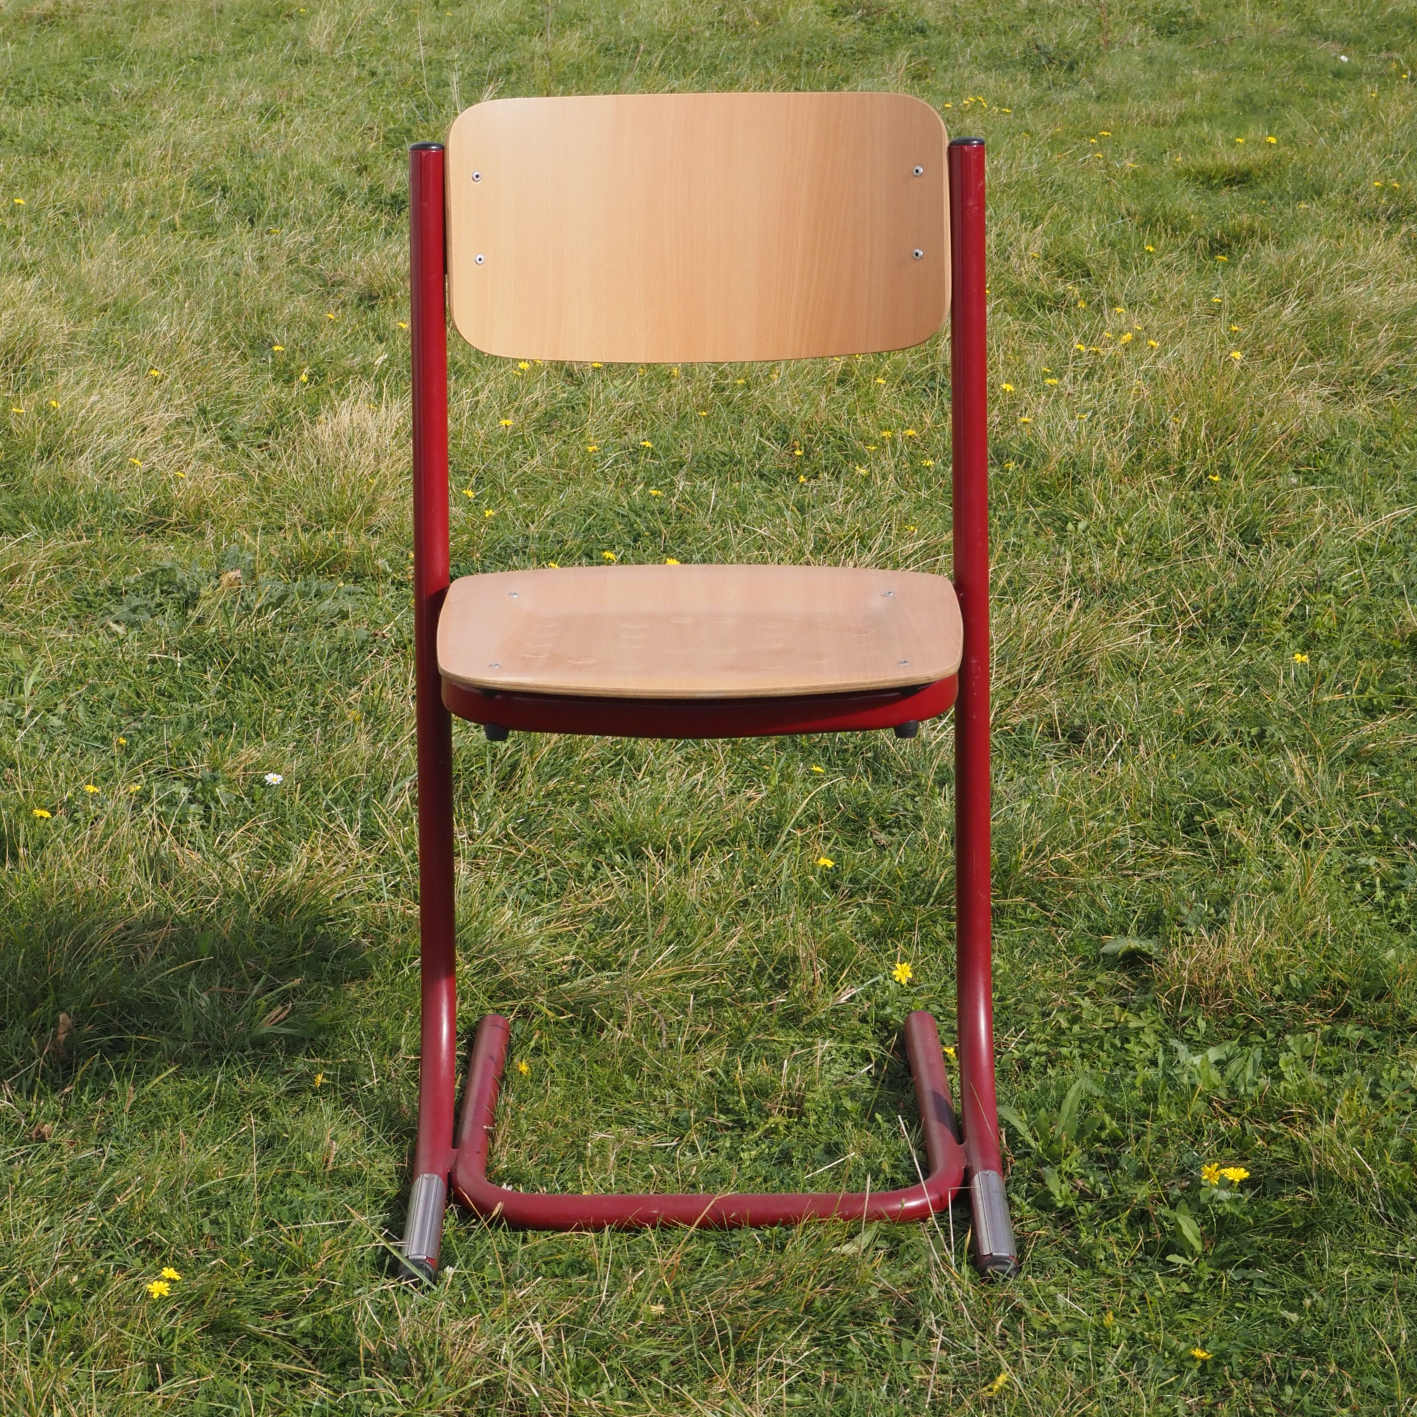 Cantilever chair with textured plywood seat and steel legs